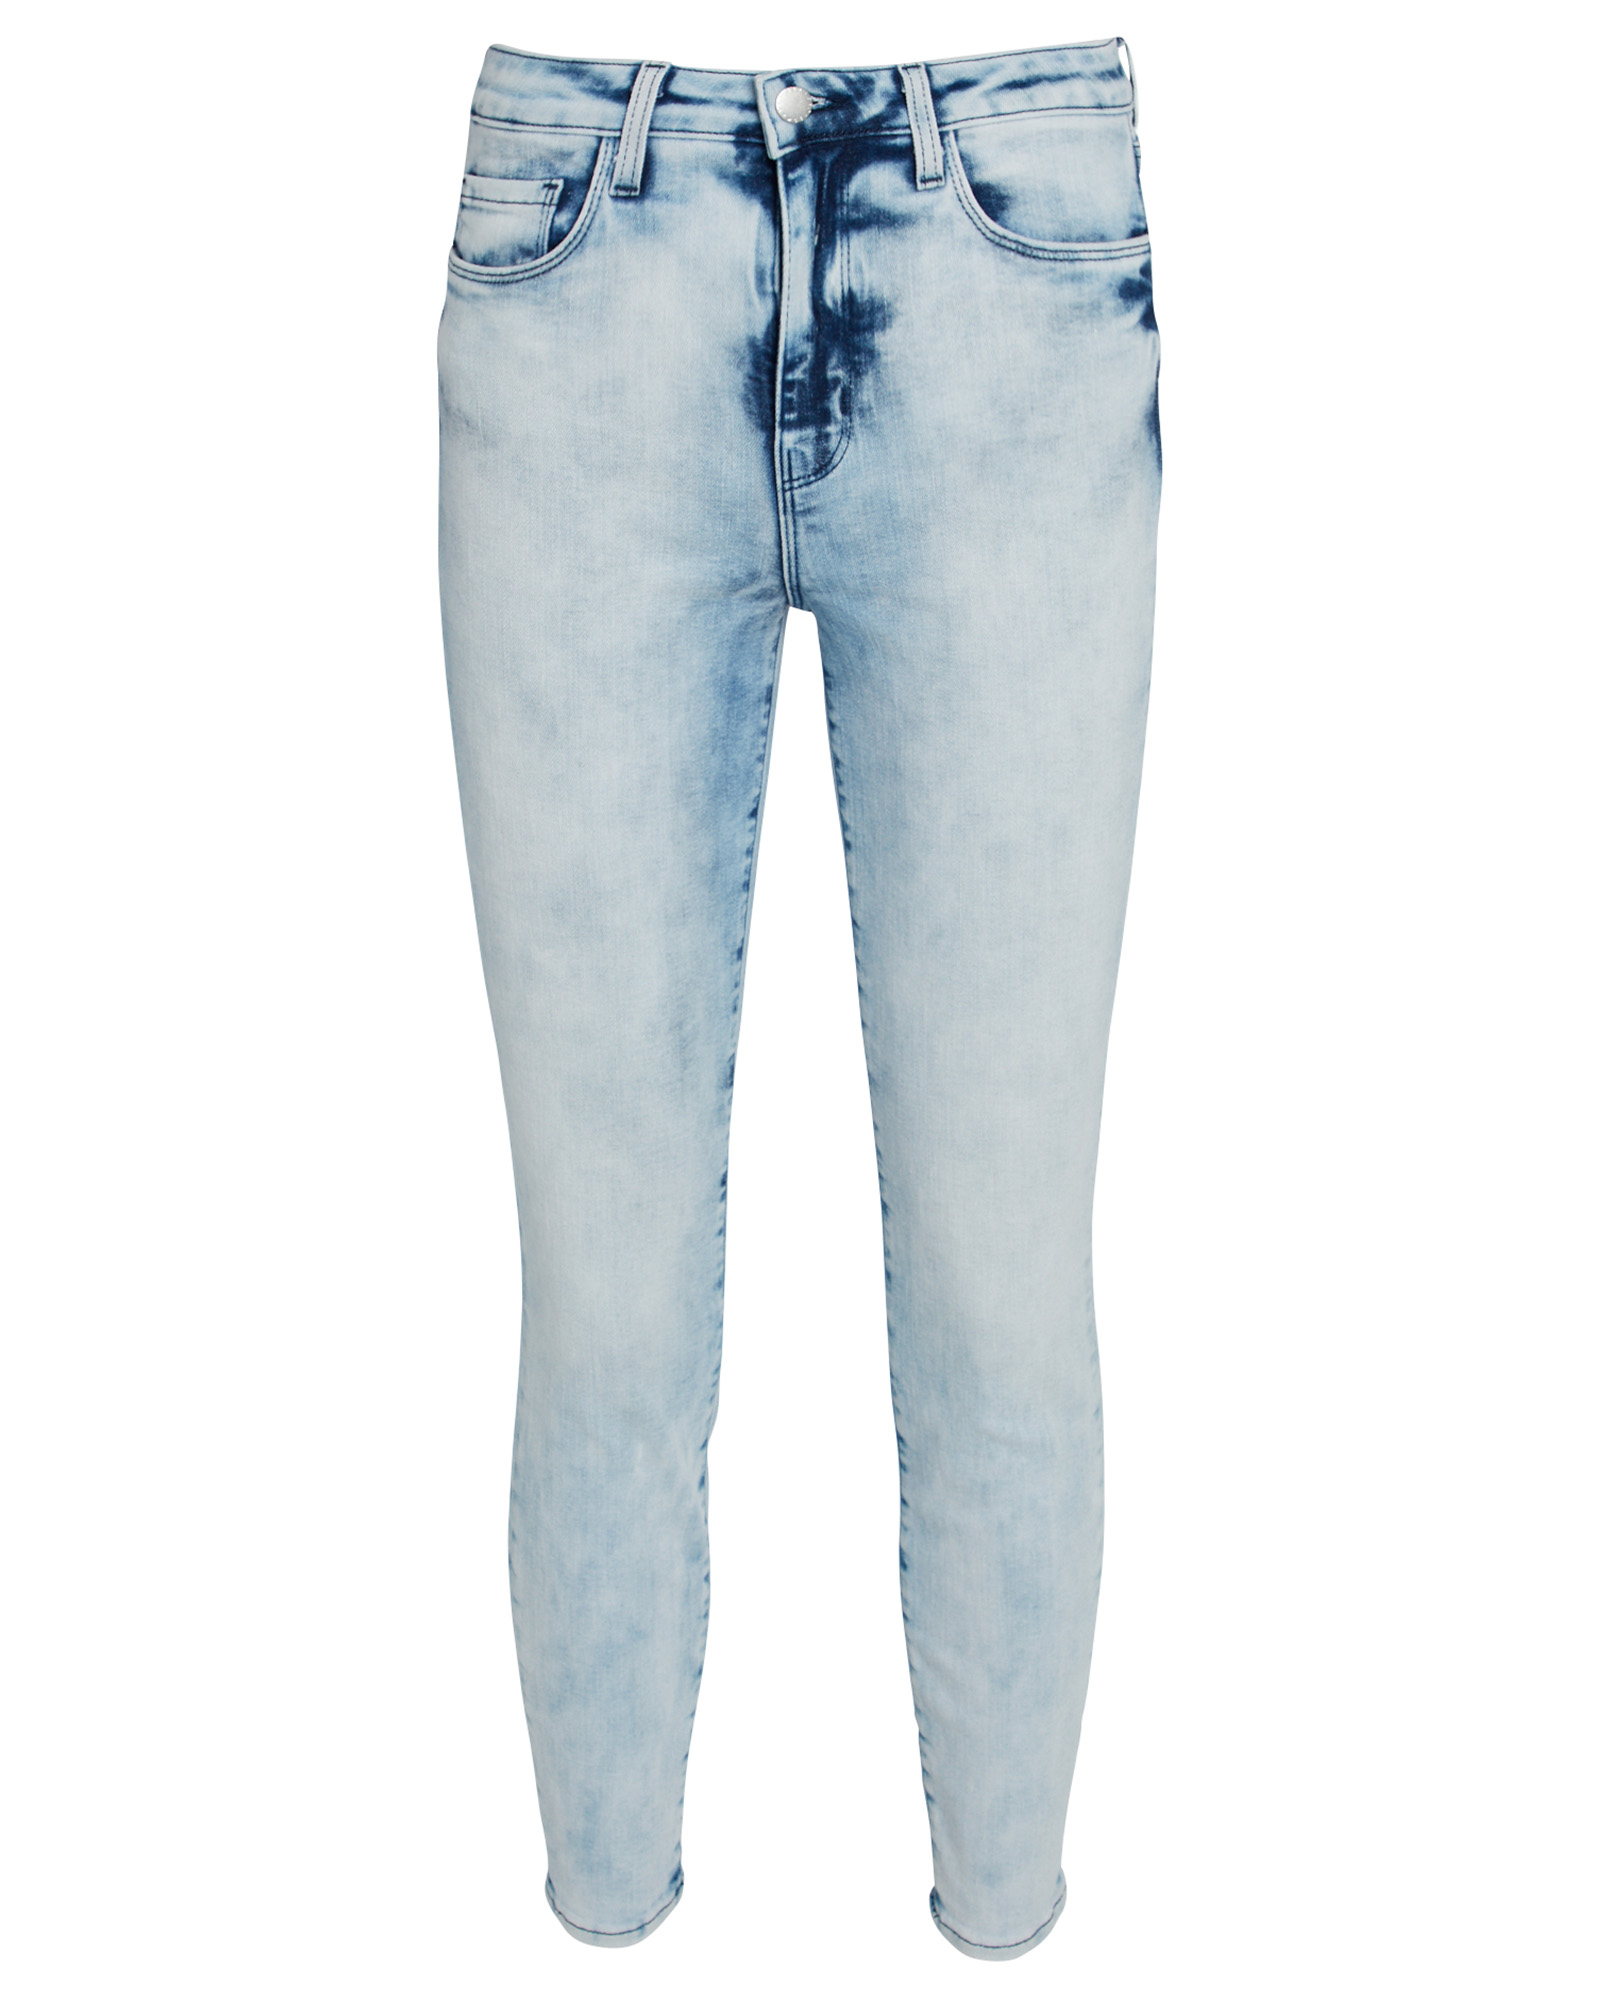 L AGENCE Margot High-Rise Skinny Jeans,060047254989